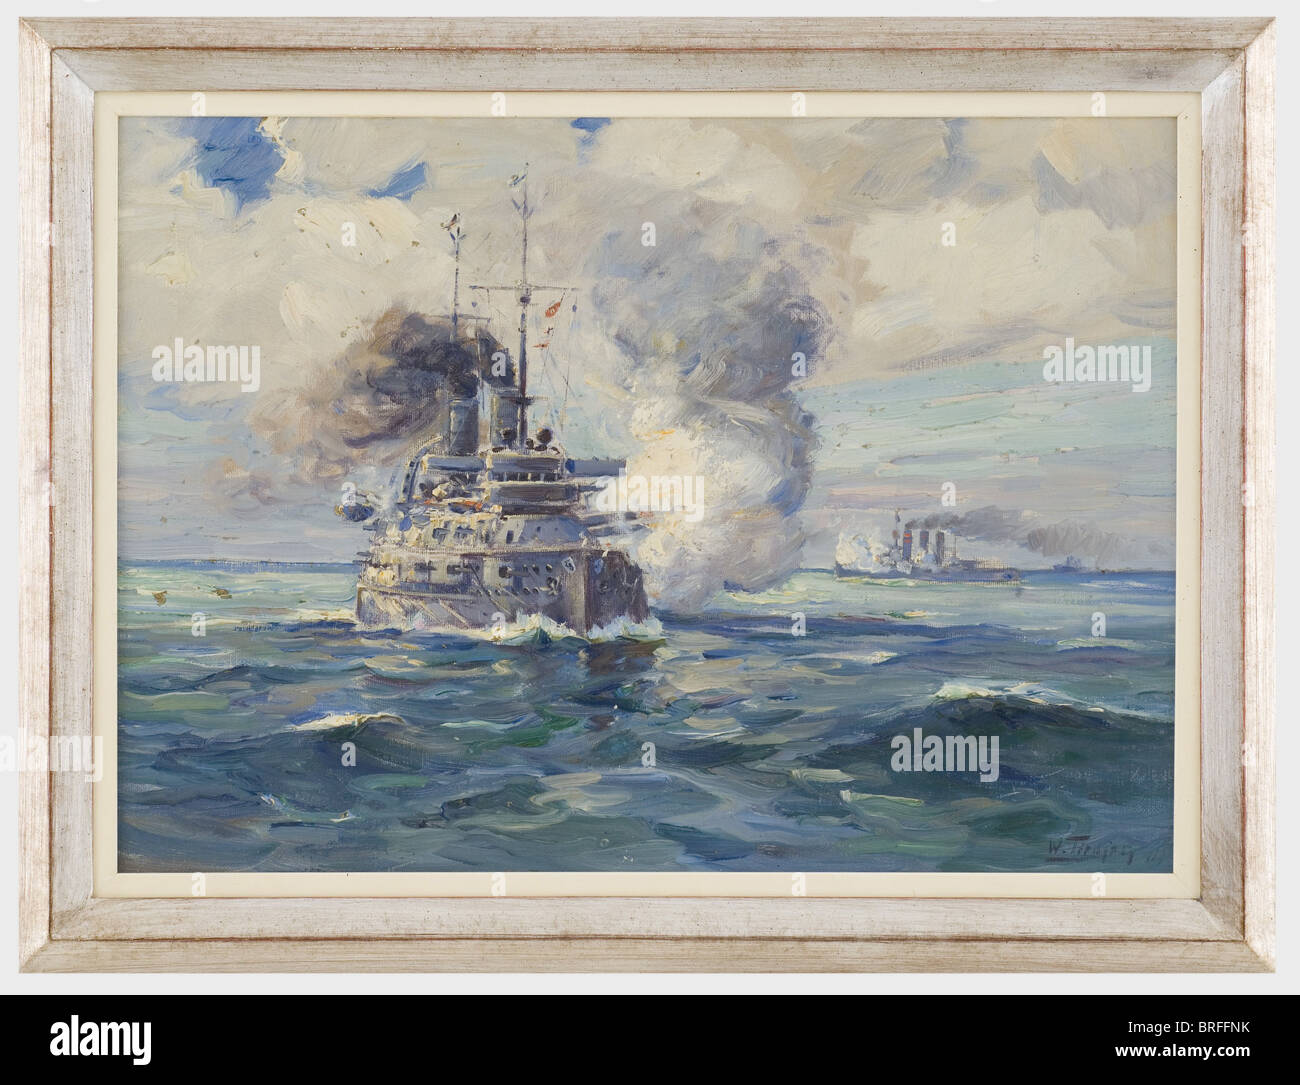 Willy Tiedjen (1881 - 1950) - the Battle of Jutland., Oil on canvas. In the foreground an Empire Class Battleship firing a volley at portside, in the background another battleship. One minute hole. Signed and illegibly dated on lower right. Silver profile frame. Picture size 70 x 50 cm, framed 83 x 63 cm. The Emperor Class was the third-largest class of German battleships, which was inspired by the British 'Dreadnought' and was the first to be powered by steam turbines. All ships of this class belonged to the third battleship squadron, took part in the Battle o, Stock Photo